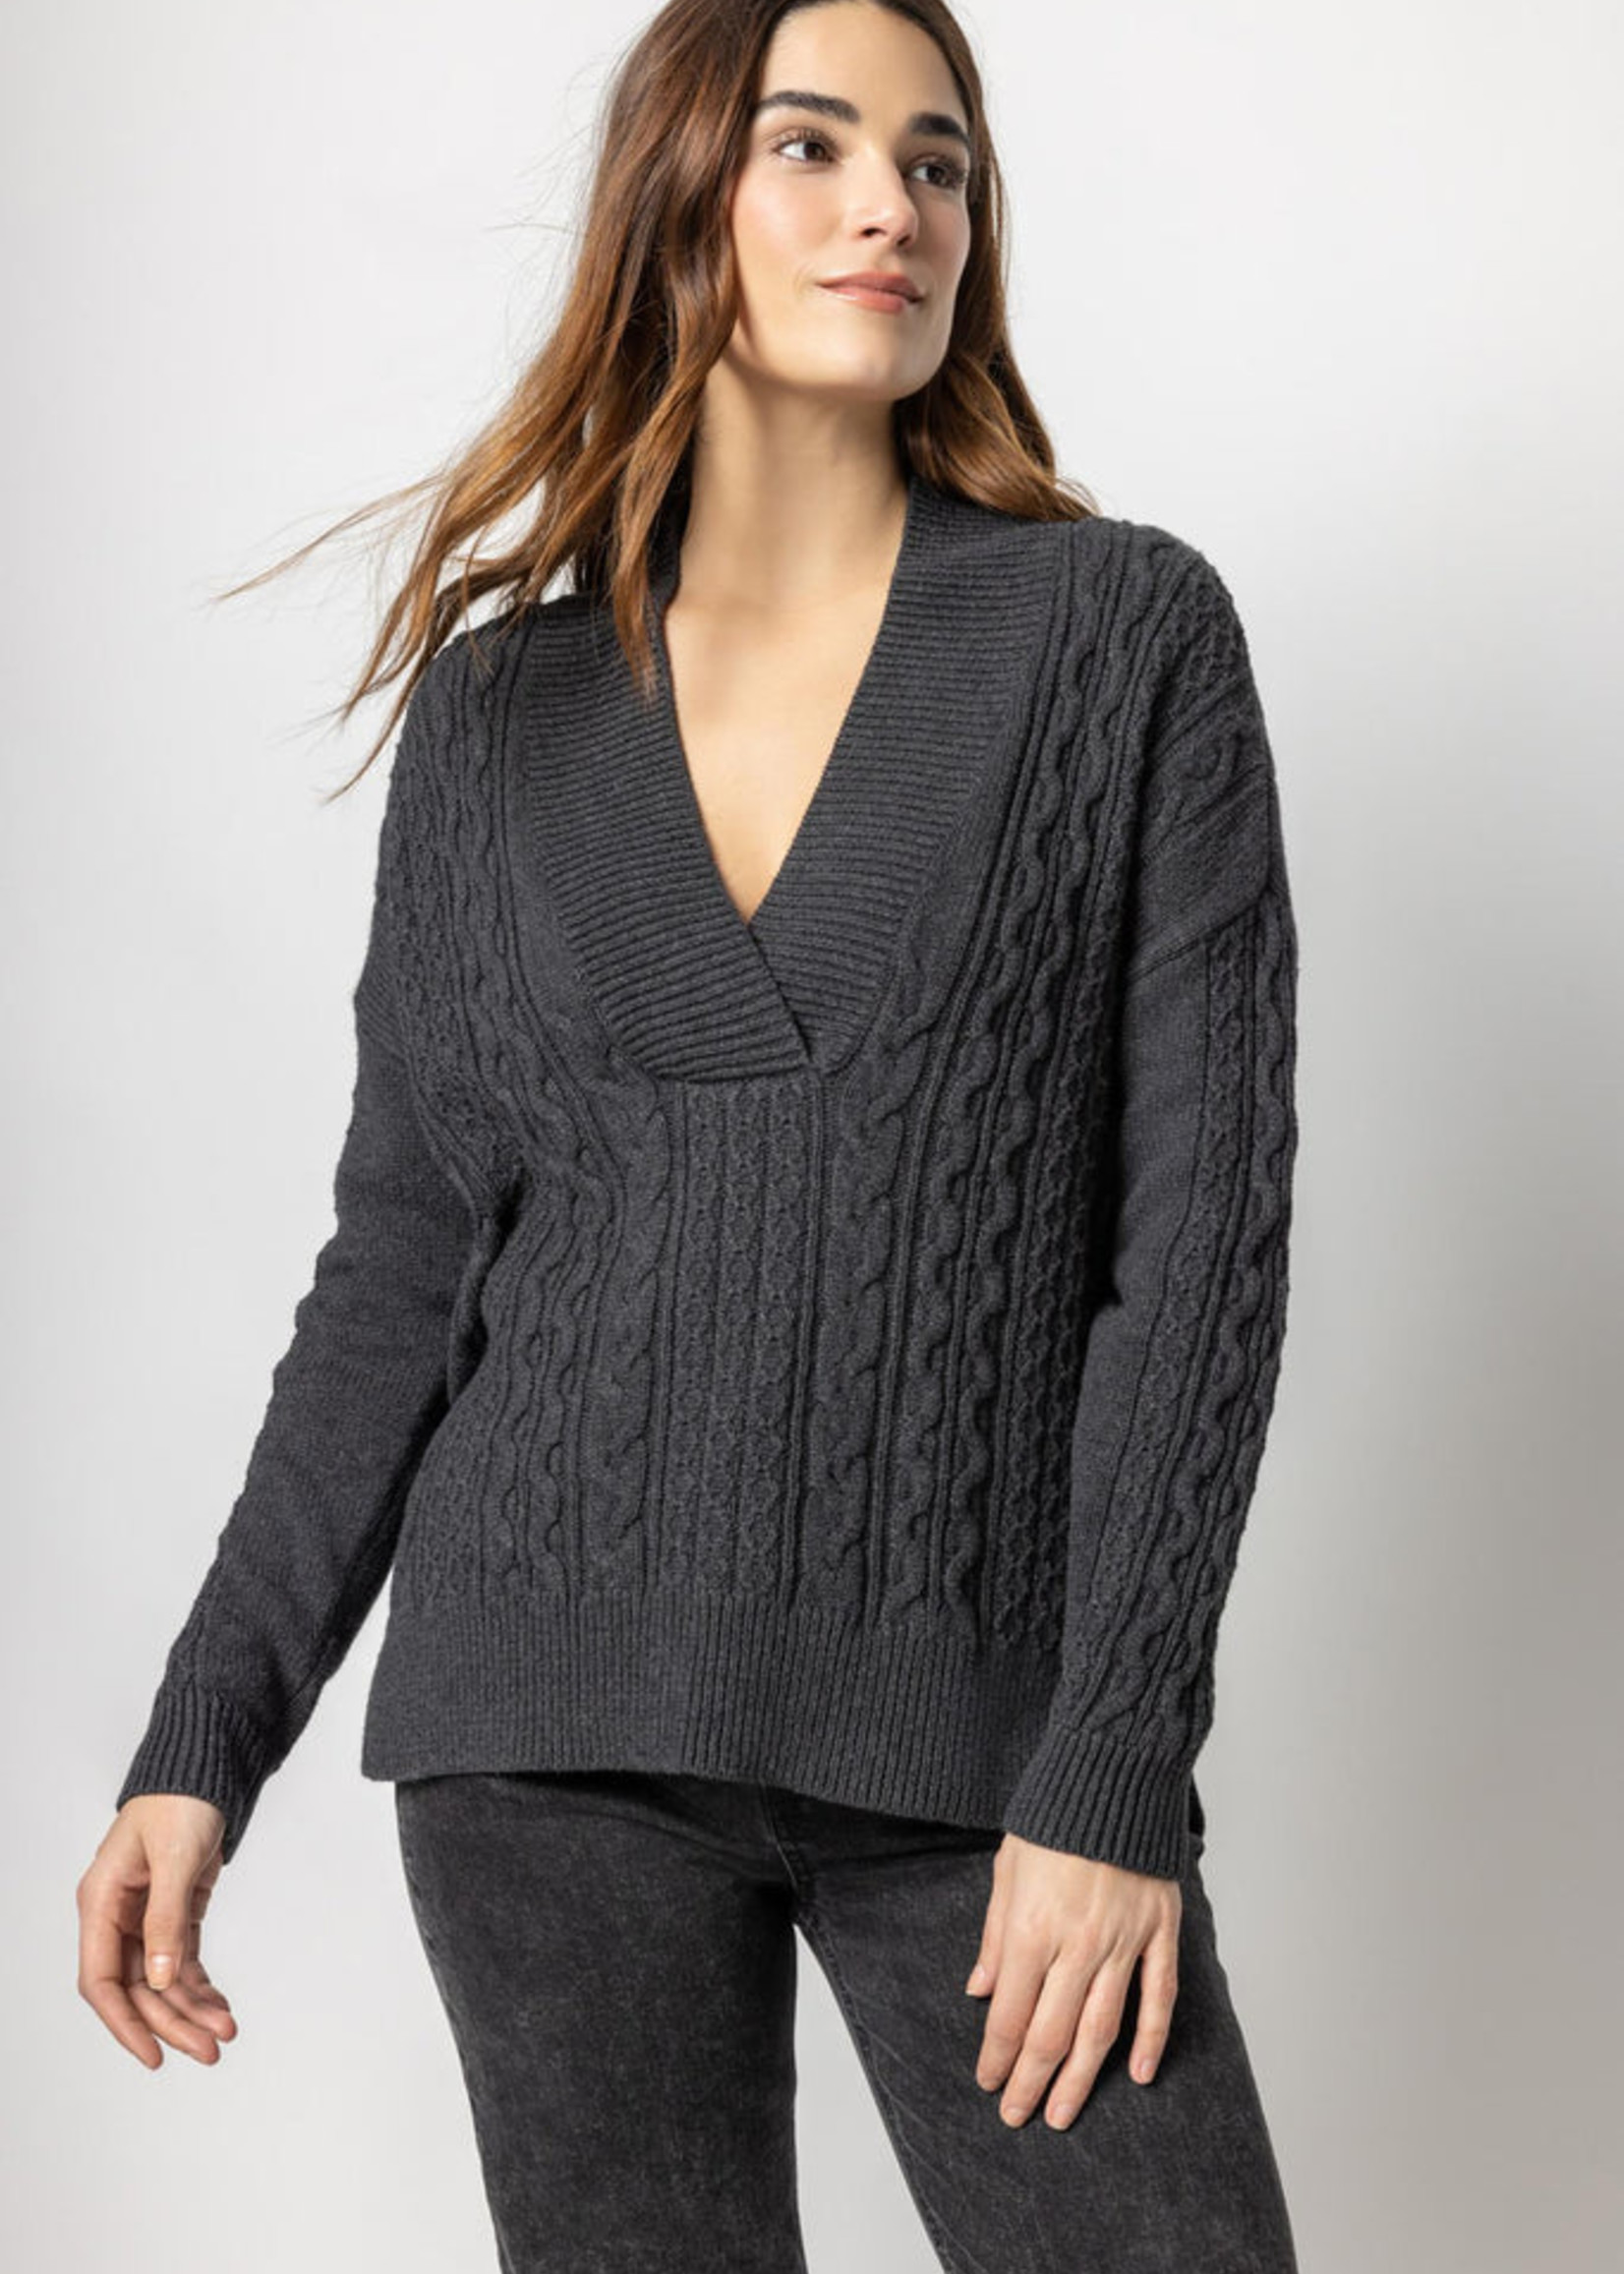 Shawl Collar Cable Sweater - Charcoal